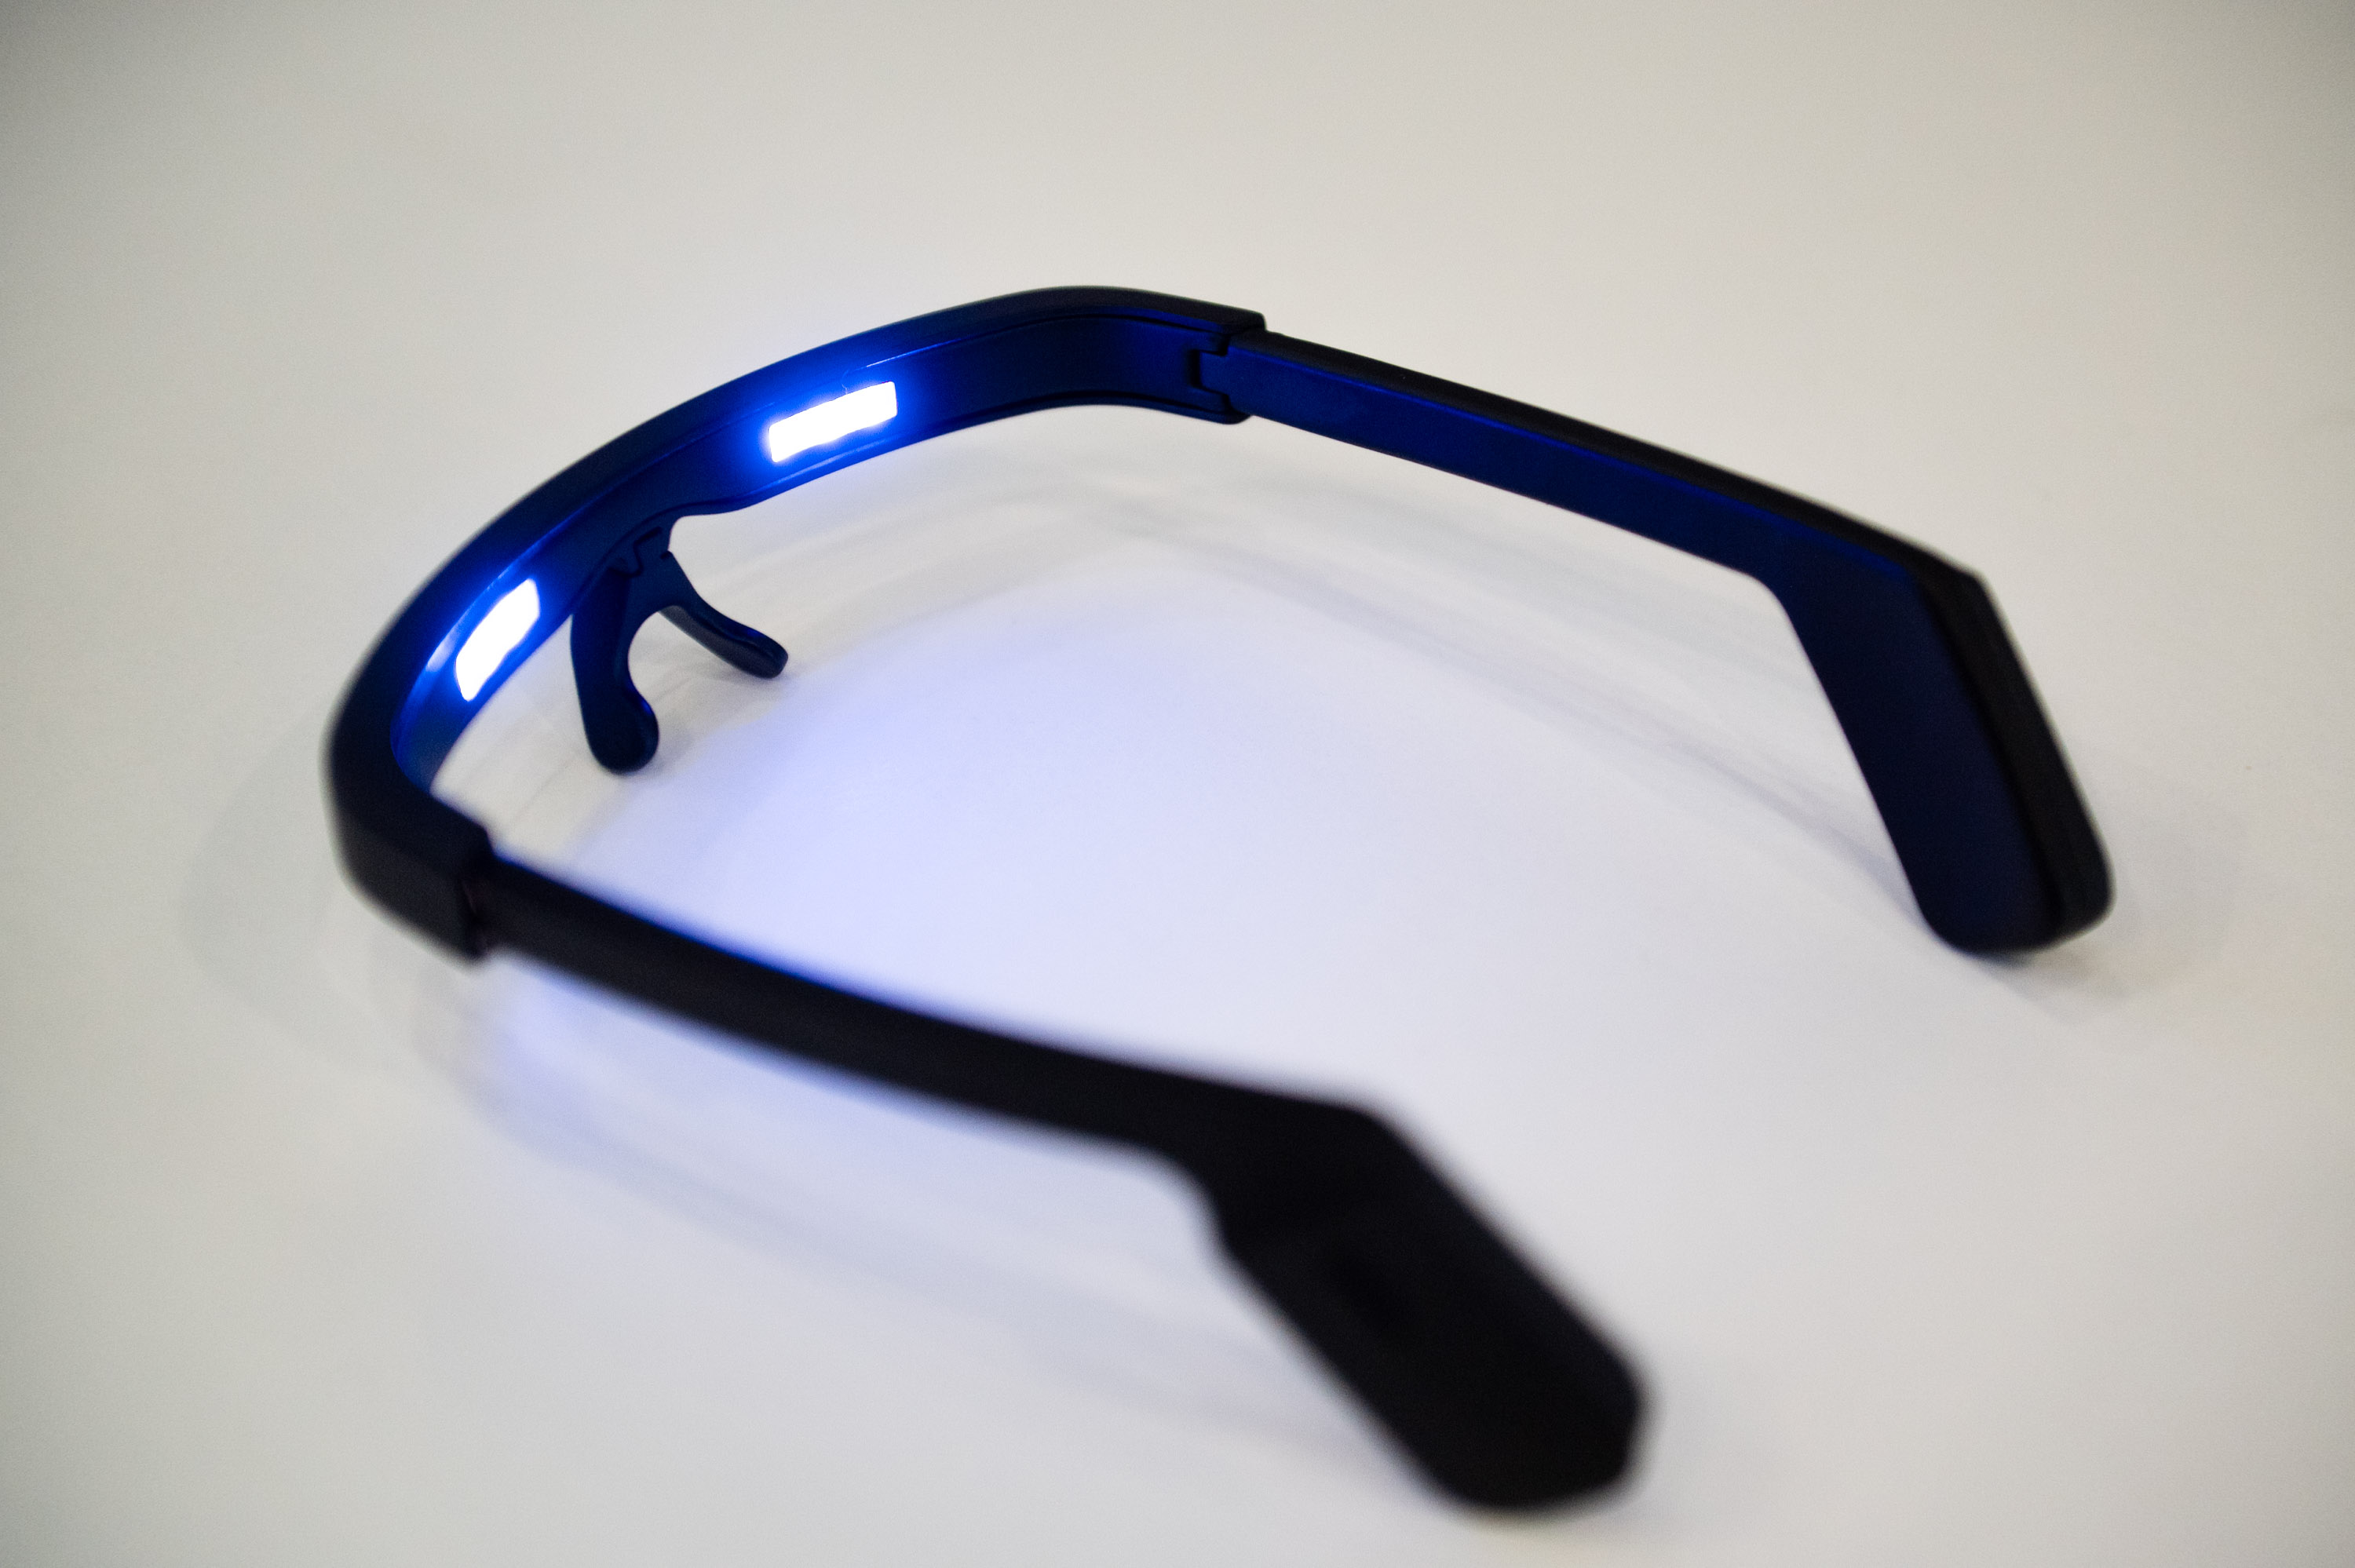 Rostec Presents its Anti-Insomnia Glasses for the First Time